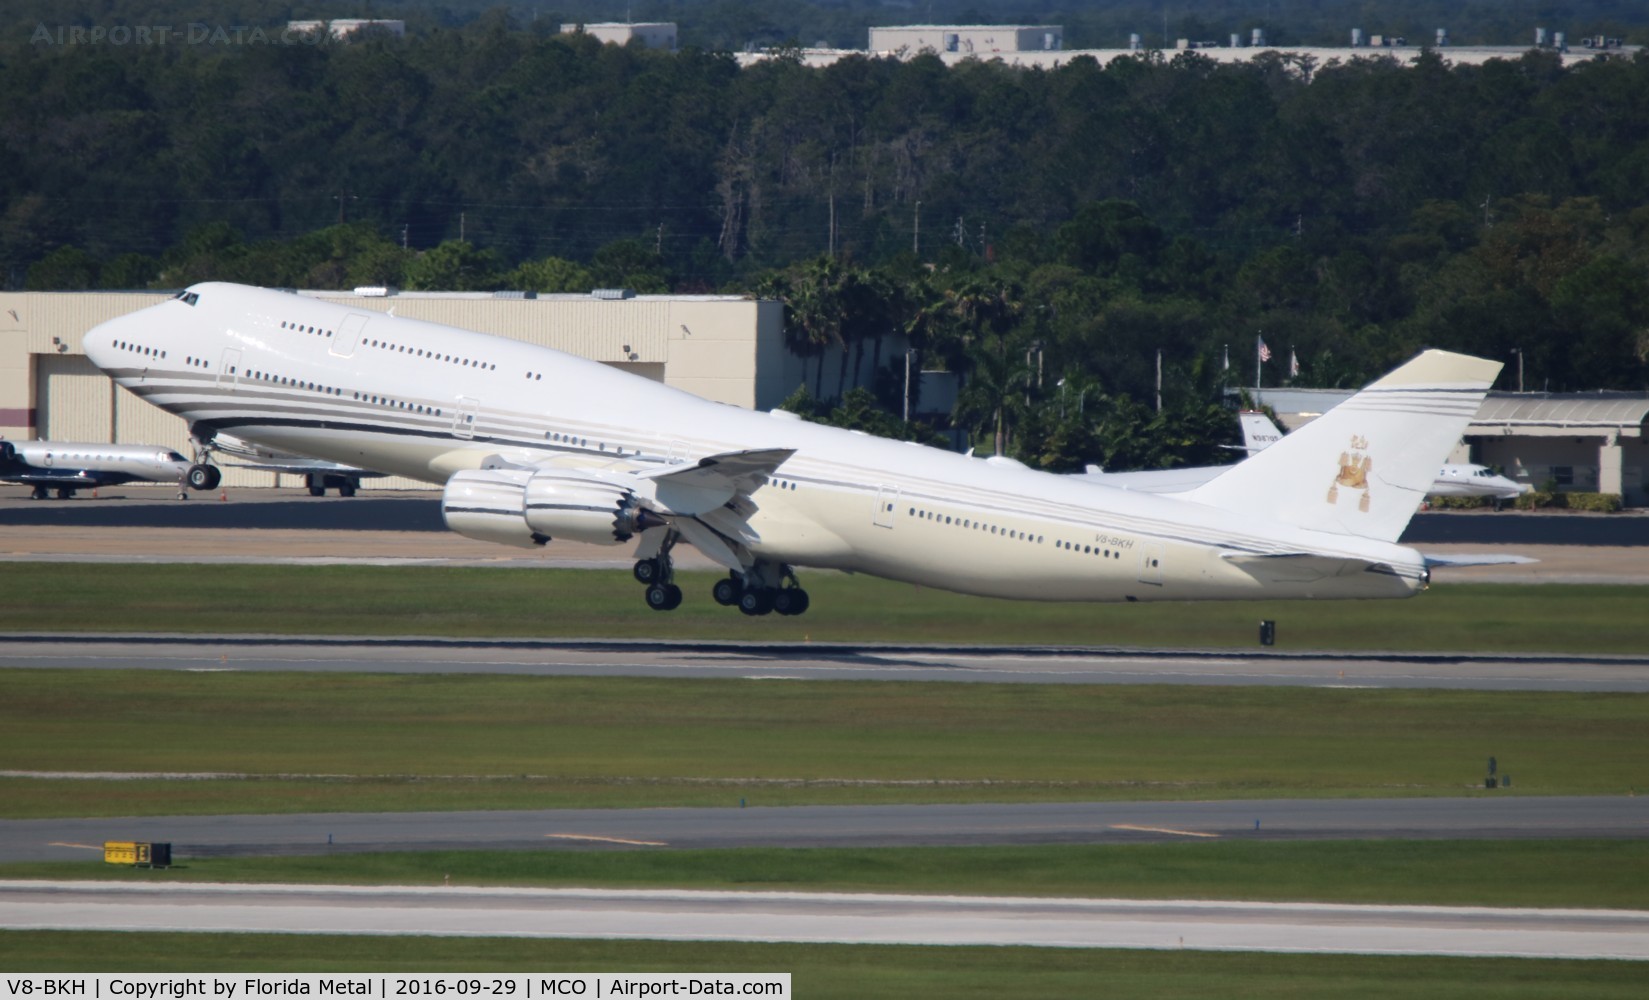 V8-BKH, 2012 Boeing 747-8LQ BBJ C/N 41060, Sultan of Brunei departing Orlando International in his TWO day old jet.  First shot I believe on the web.  Aircraft built in 2012, but spent time in the desert and getting interior outfitted